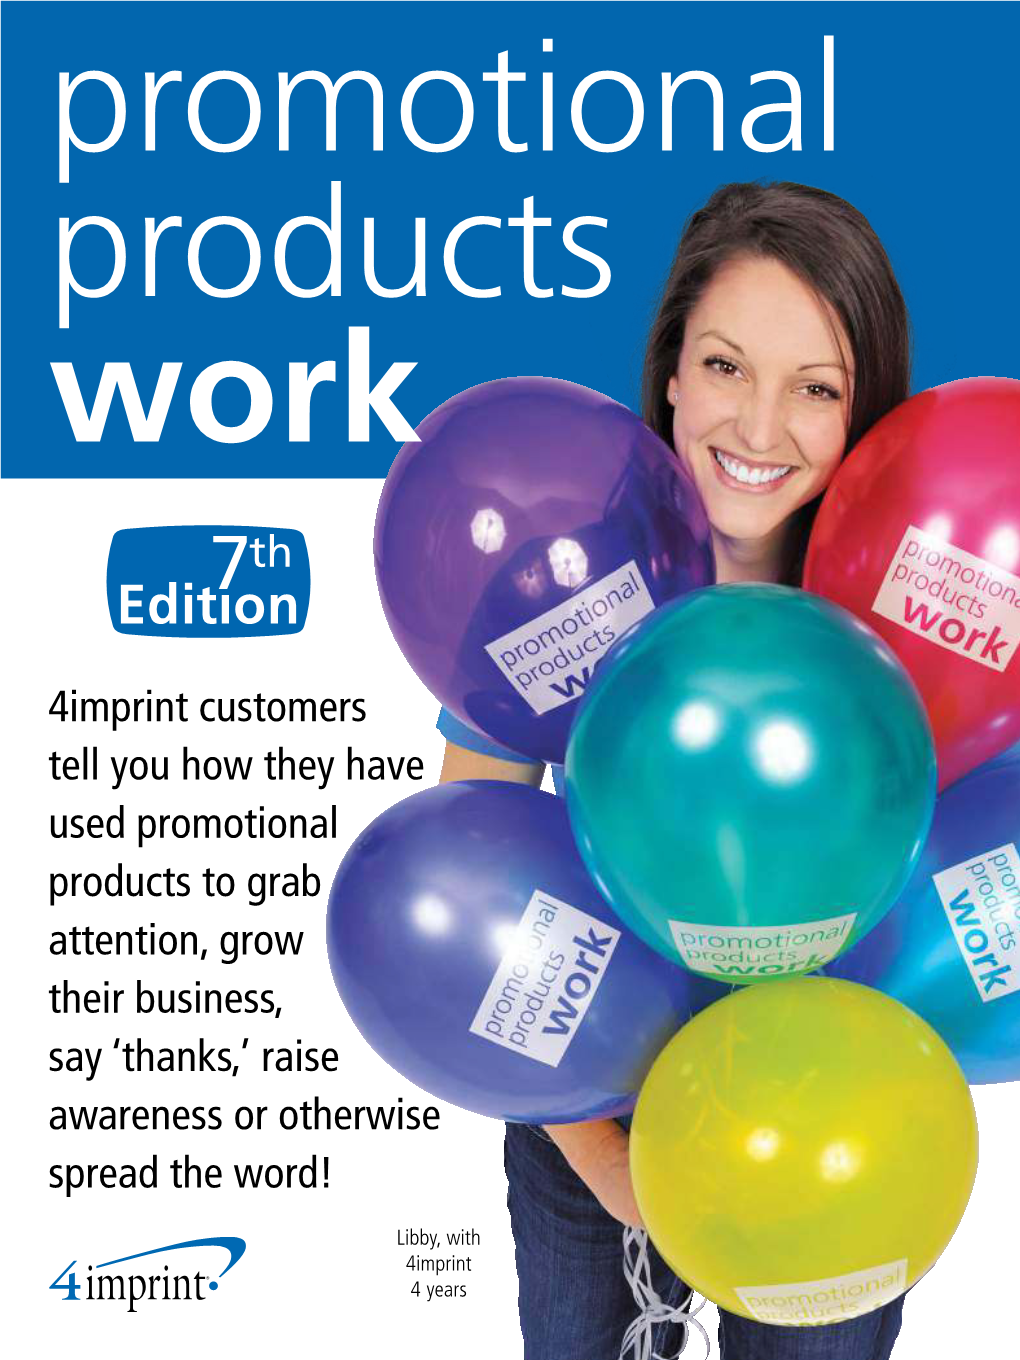 Promotional Products Work 7